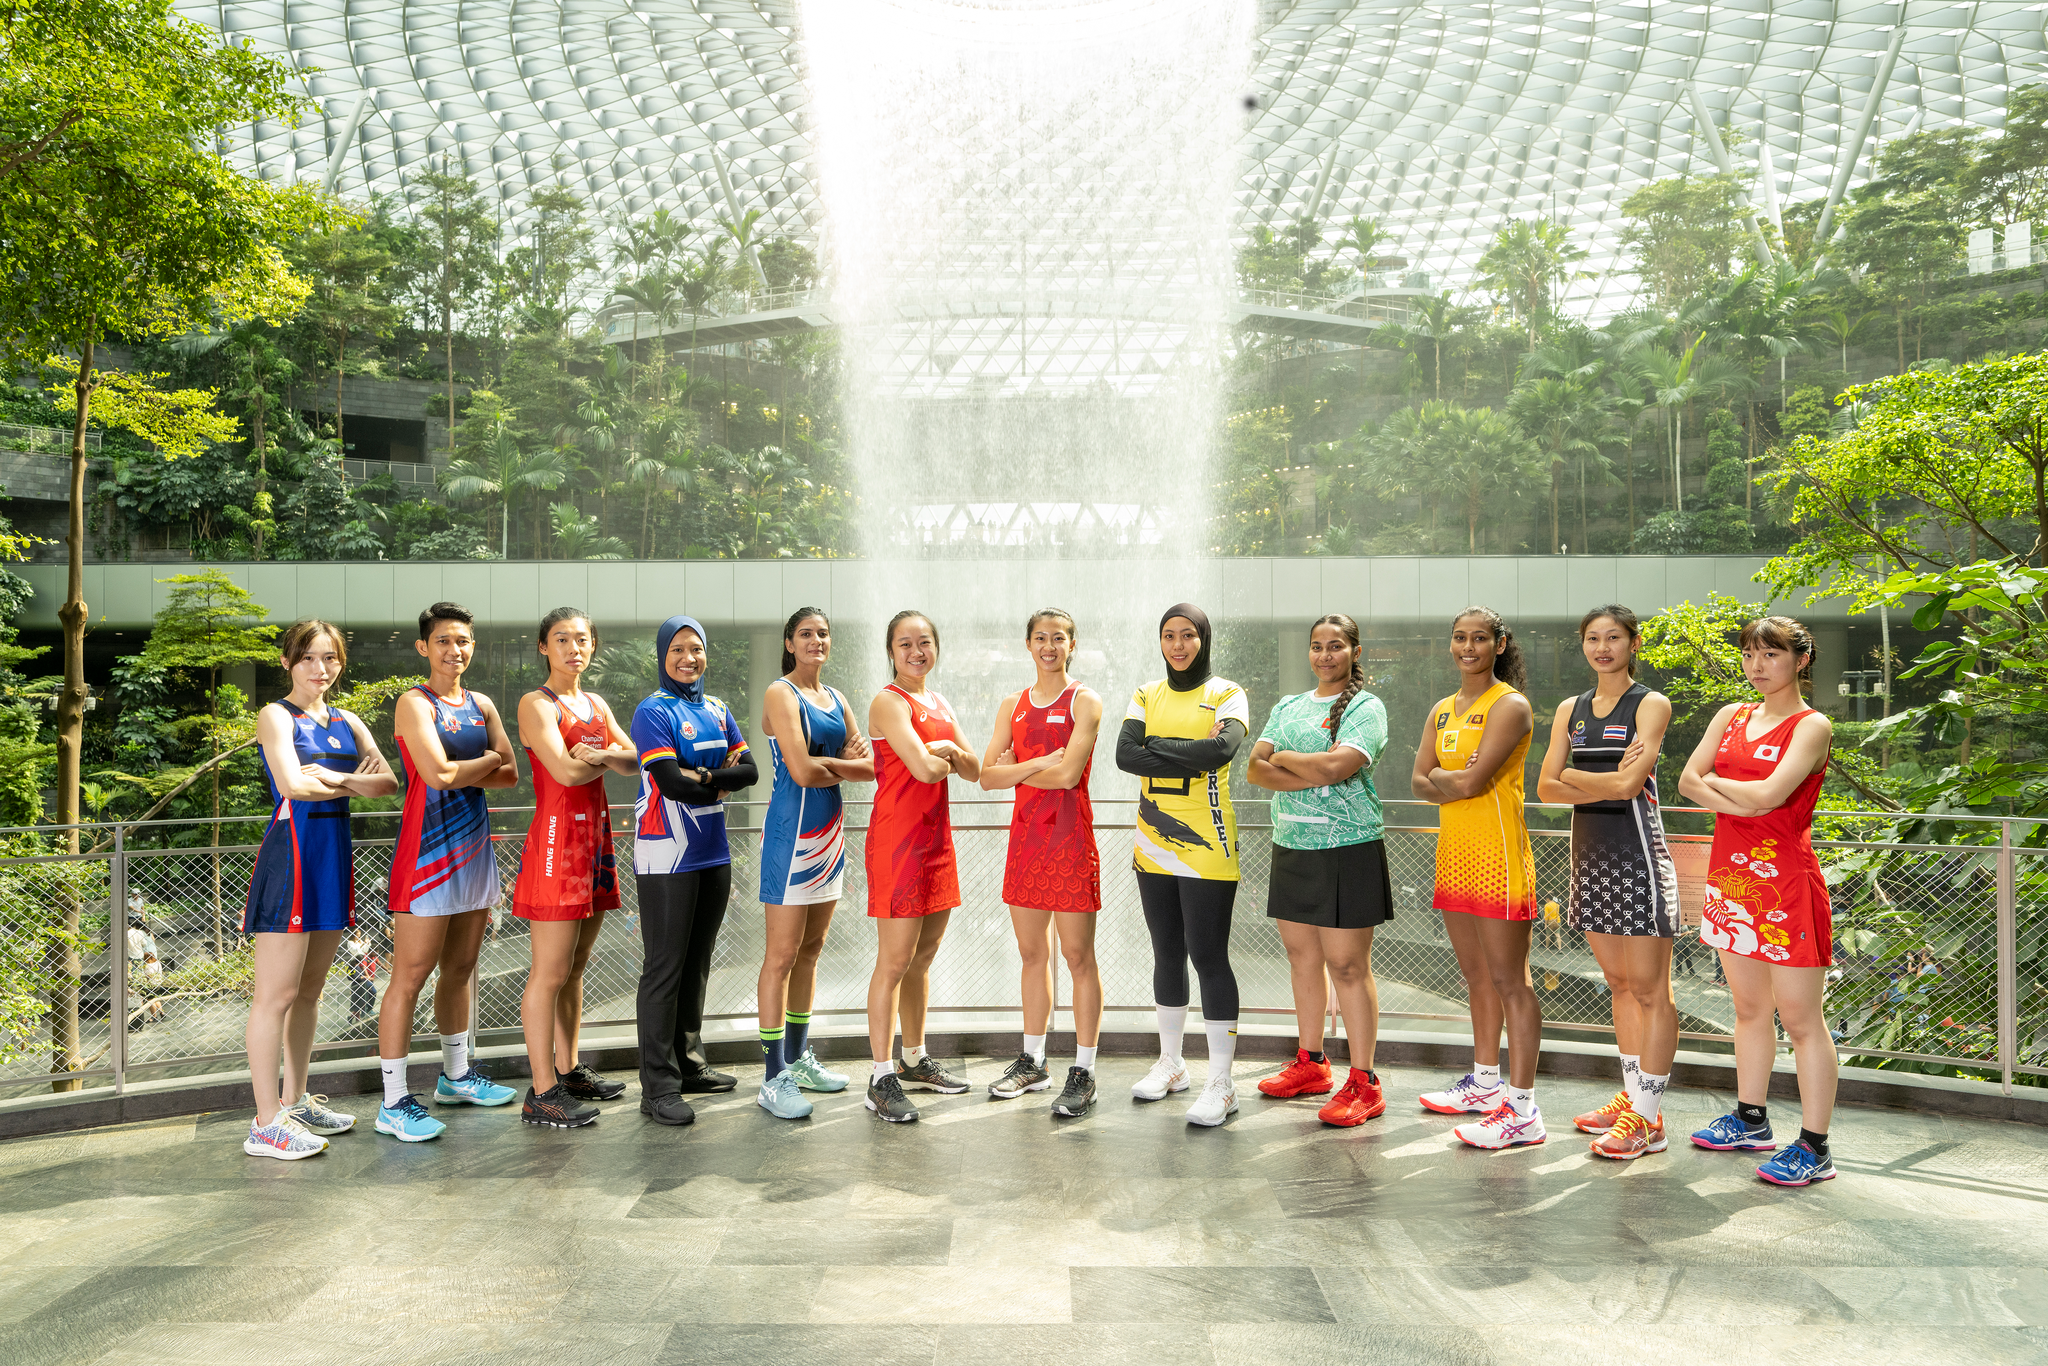 Team captains of the 2022 Asian Netball Championships gathered for a photo shoot at the Jewel Changi Airport in Singapore before the event begins tomorrow ©Netball Singapore